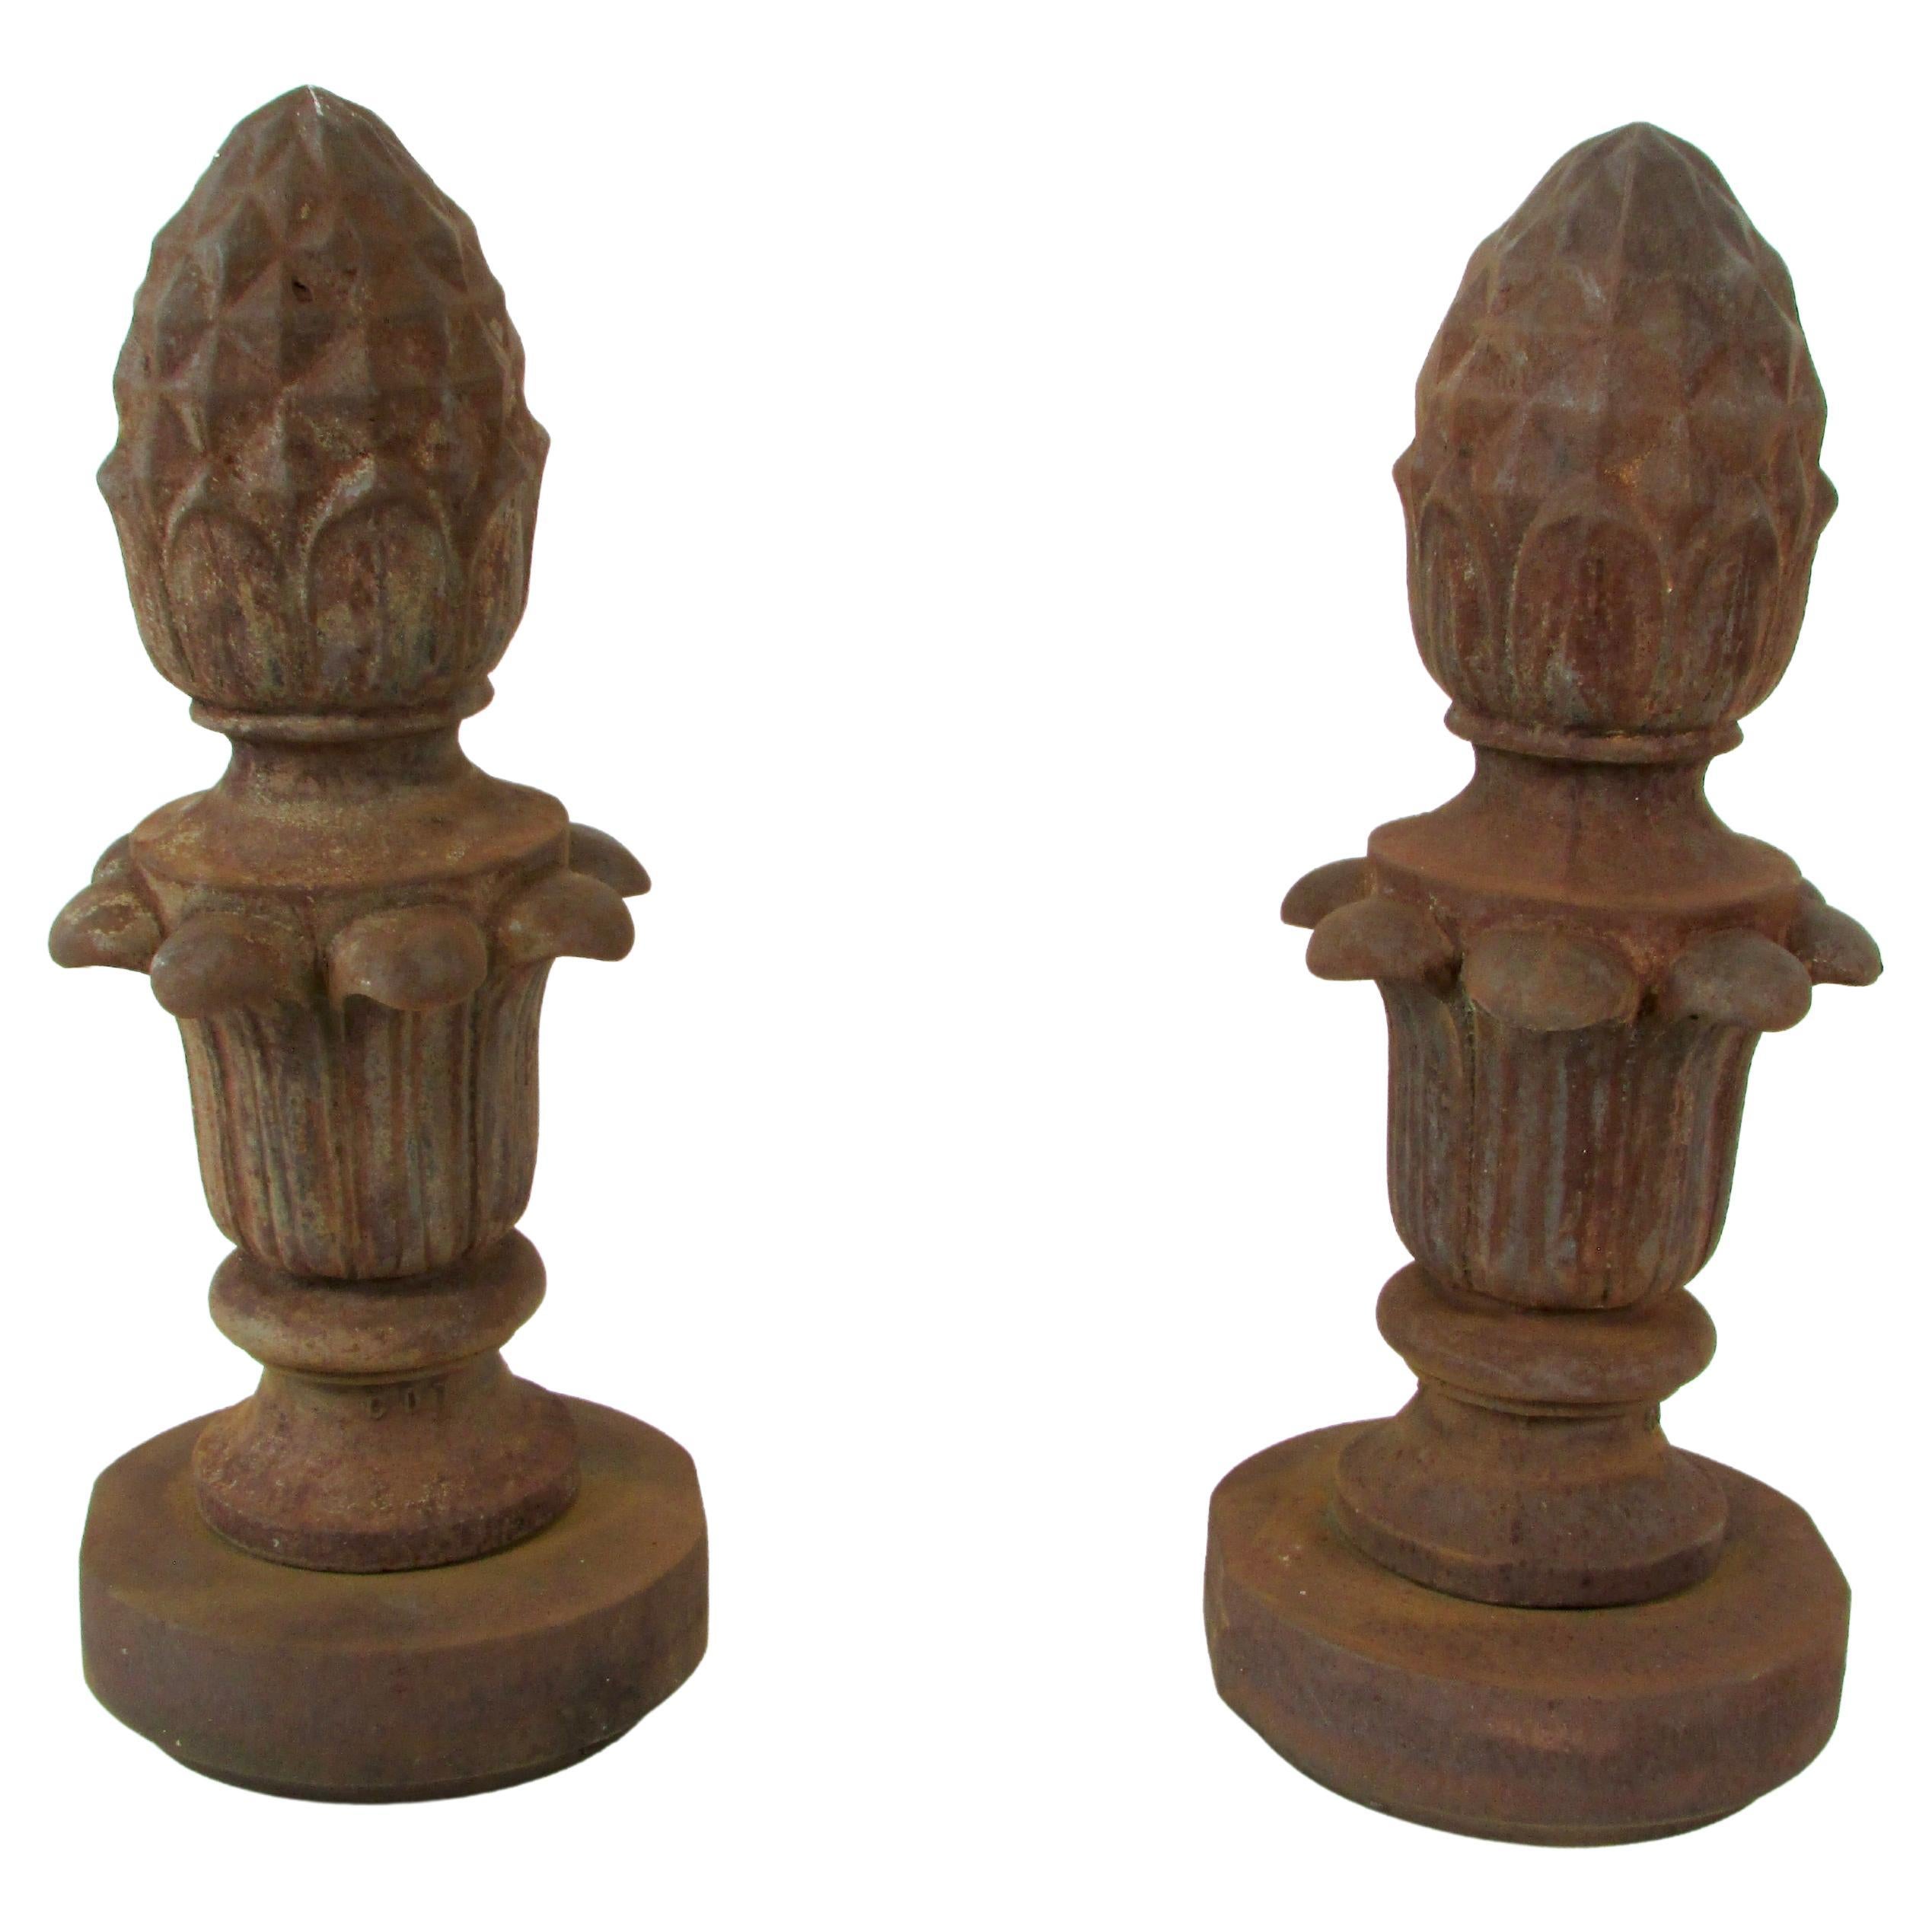 Pair of Large 19th Century Cast Iron Finials for Out Door Garden Sculpture